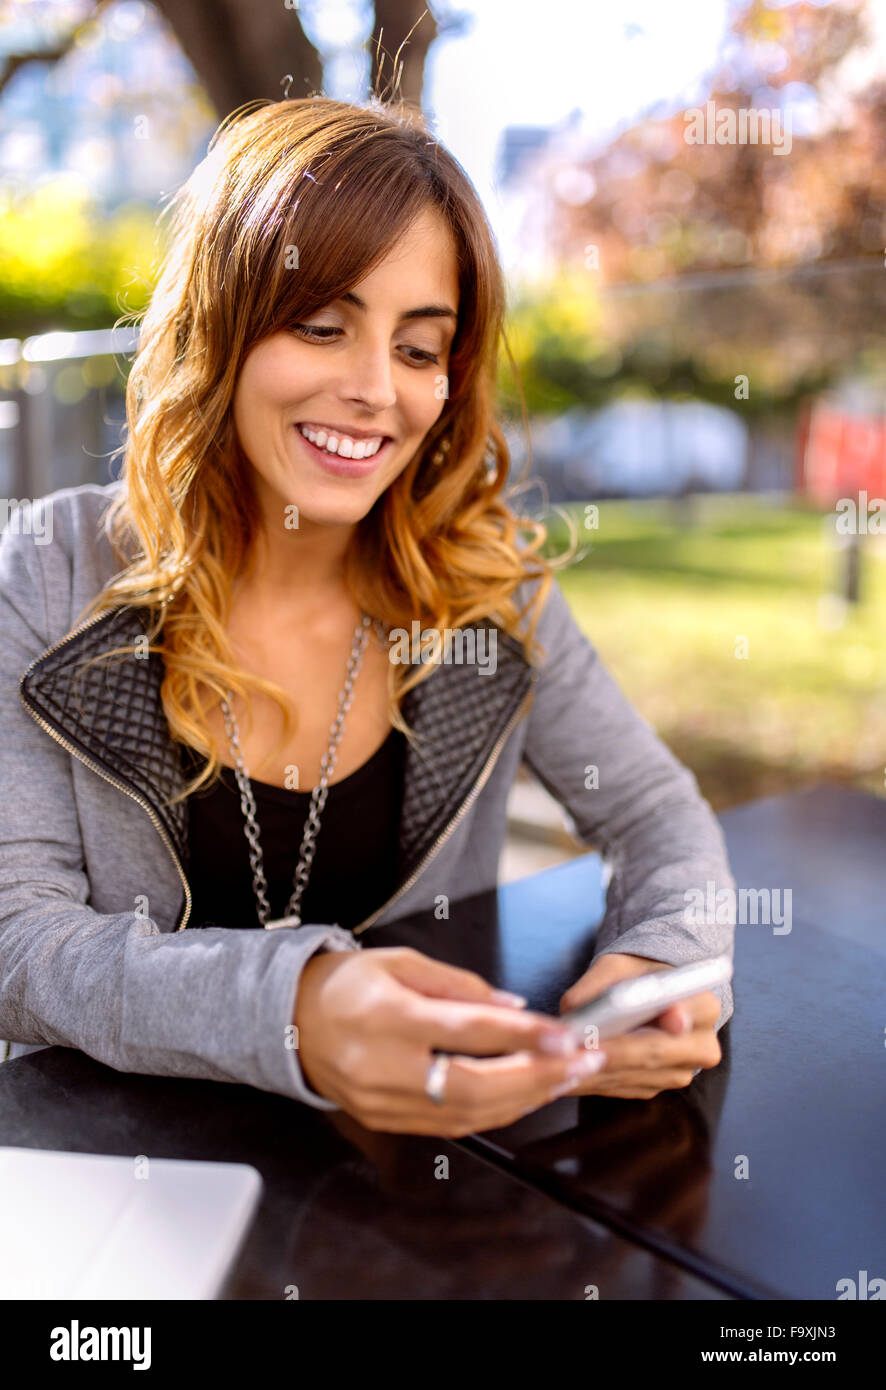 Portrait of happy young woman looking at her smartphone Banque D'Images